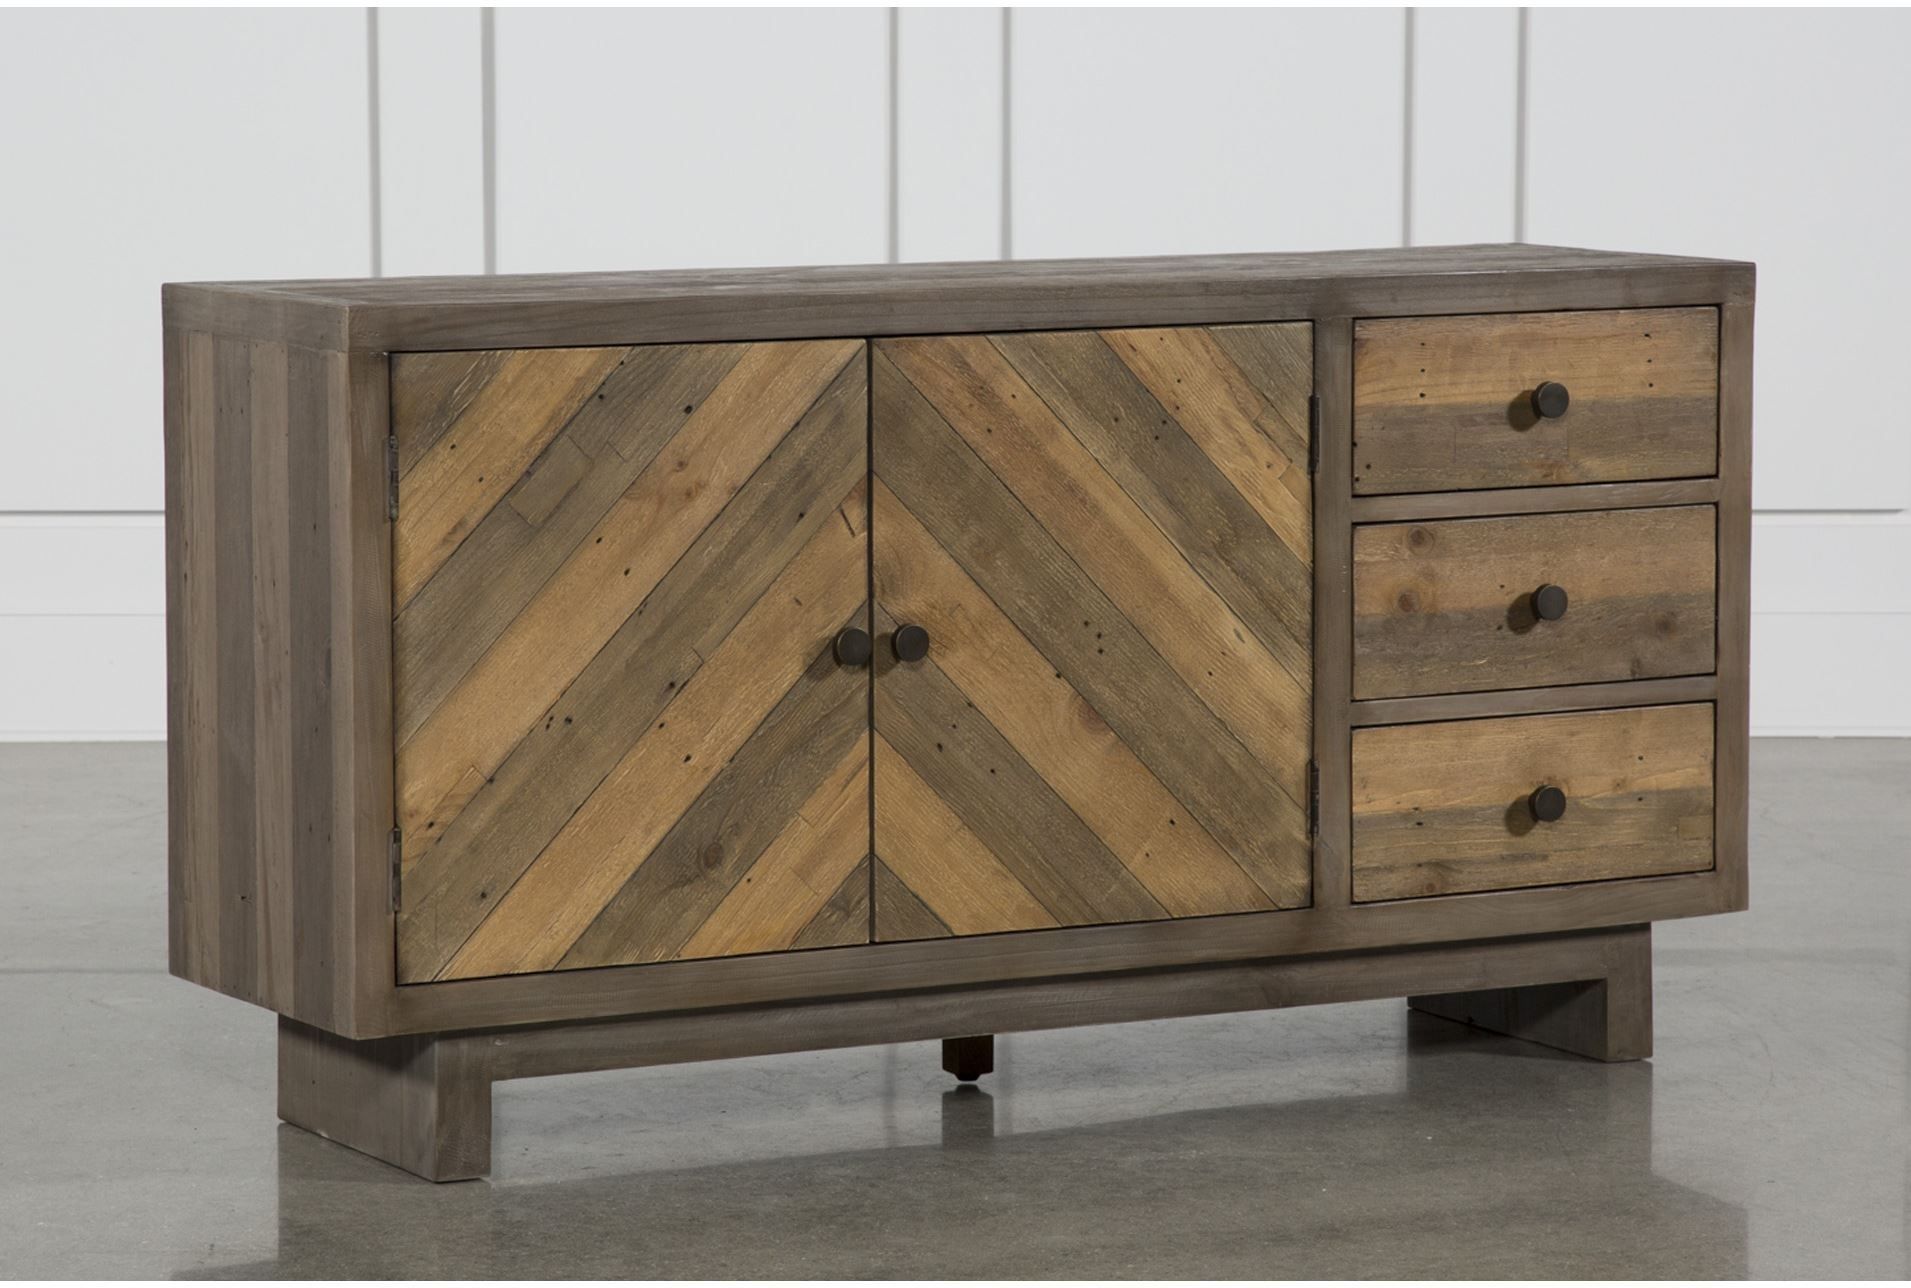 Otb Aged Pine 3 Drawer/2 Door Sideboard, Brown | Pinterest | Products Throughout Current Burnt Oak Bleached Pine Sideboards (View 11 of 20)